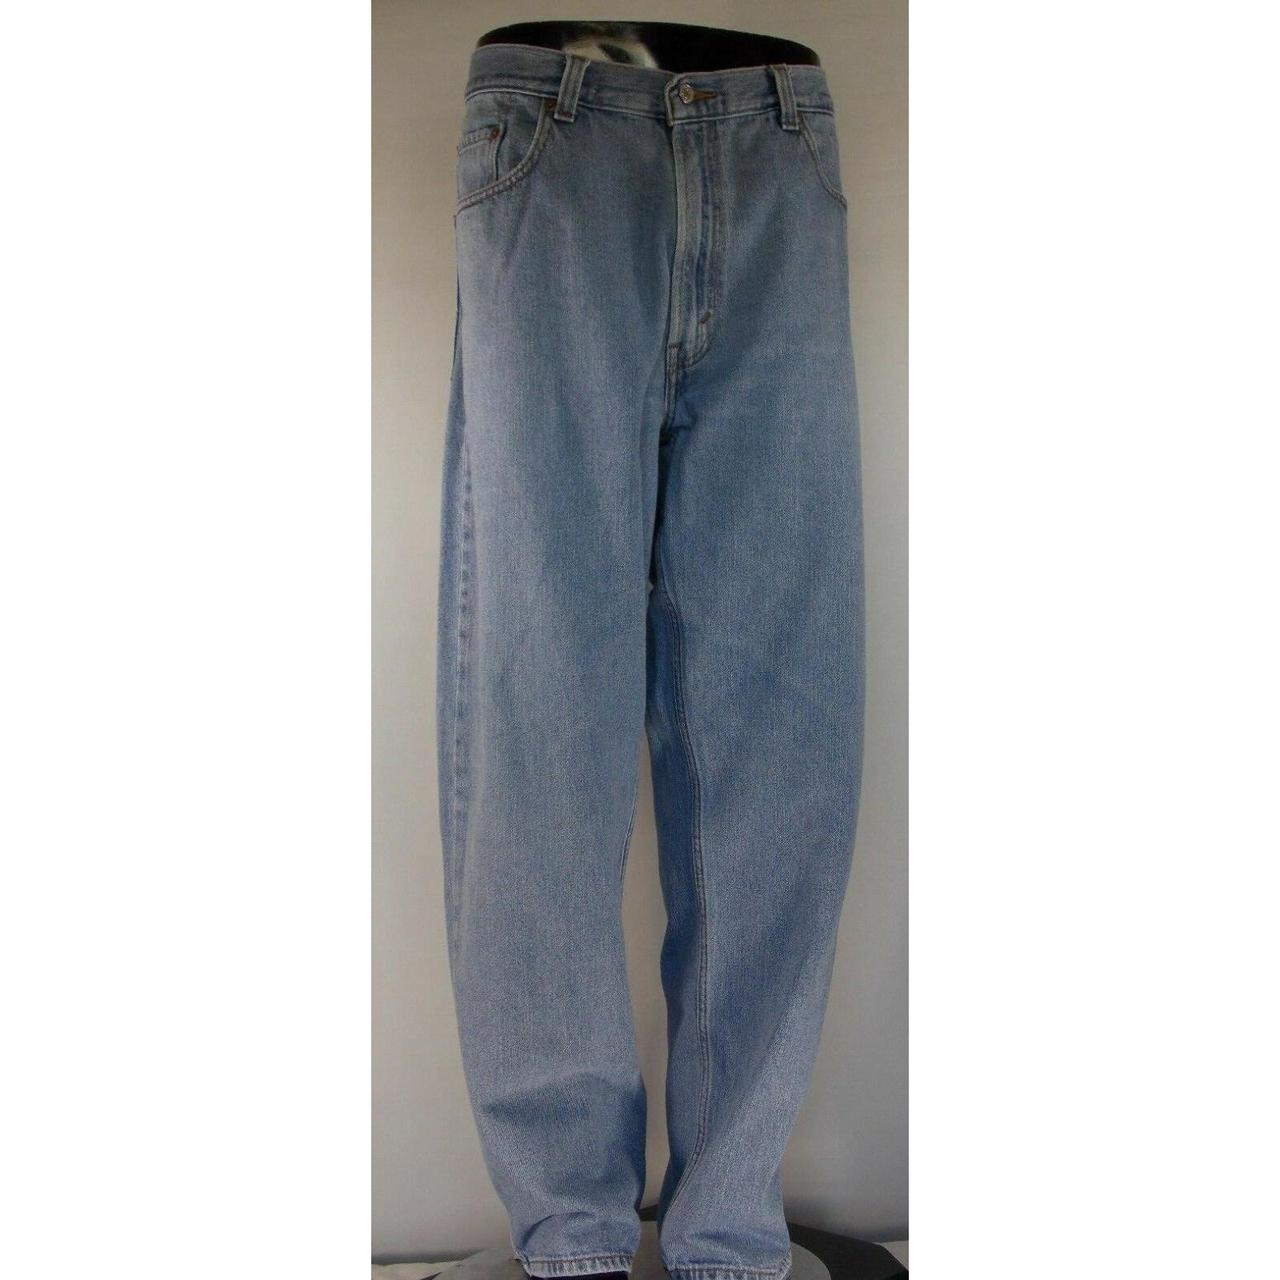 Product Image 1 - Levi's 550 Relaxed Fit Men's